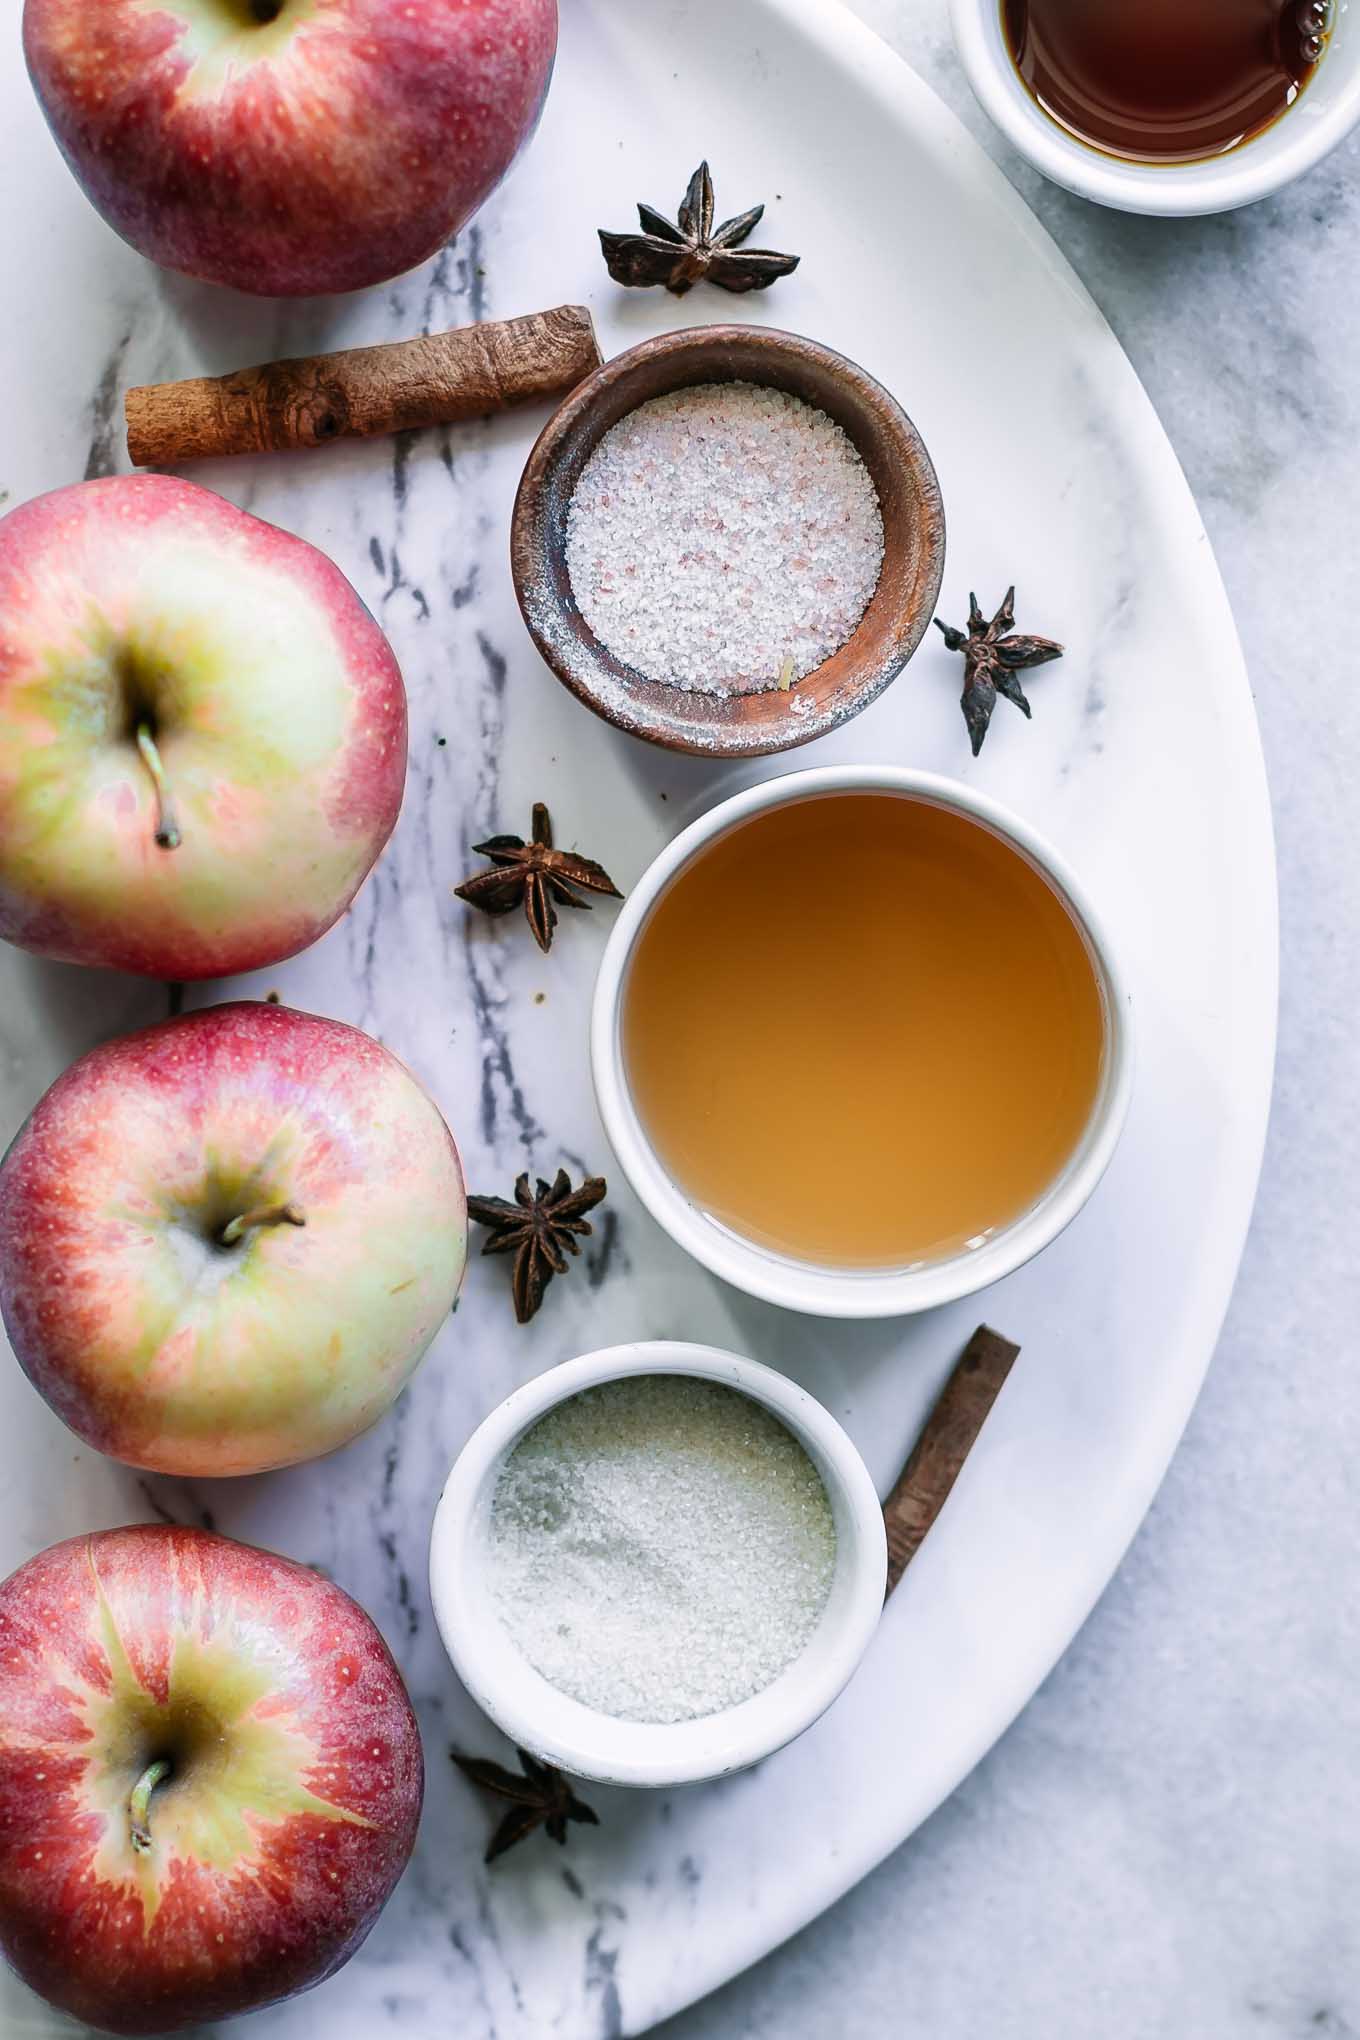 apples and bowls of apple cider vinegar, sugar, salt, vanilla, and water on a white table